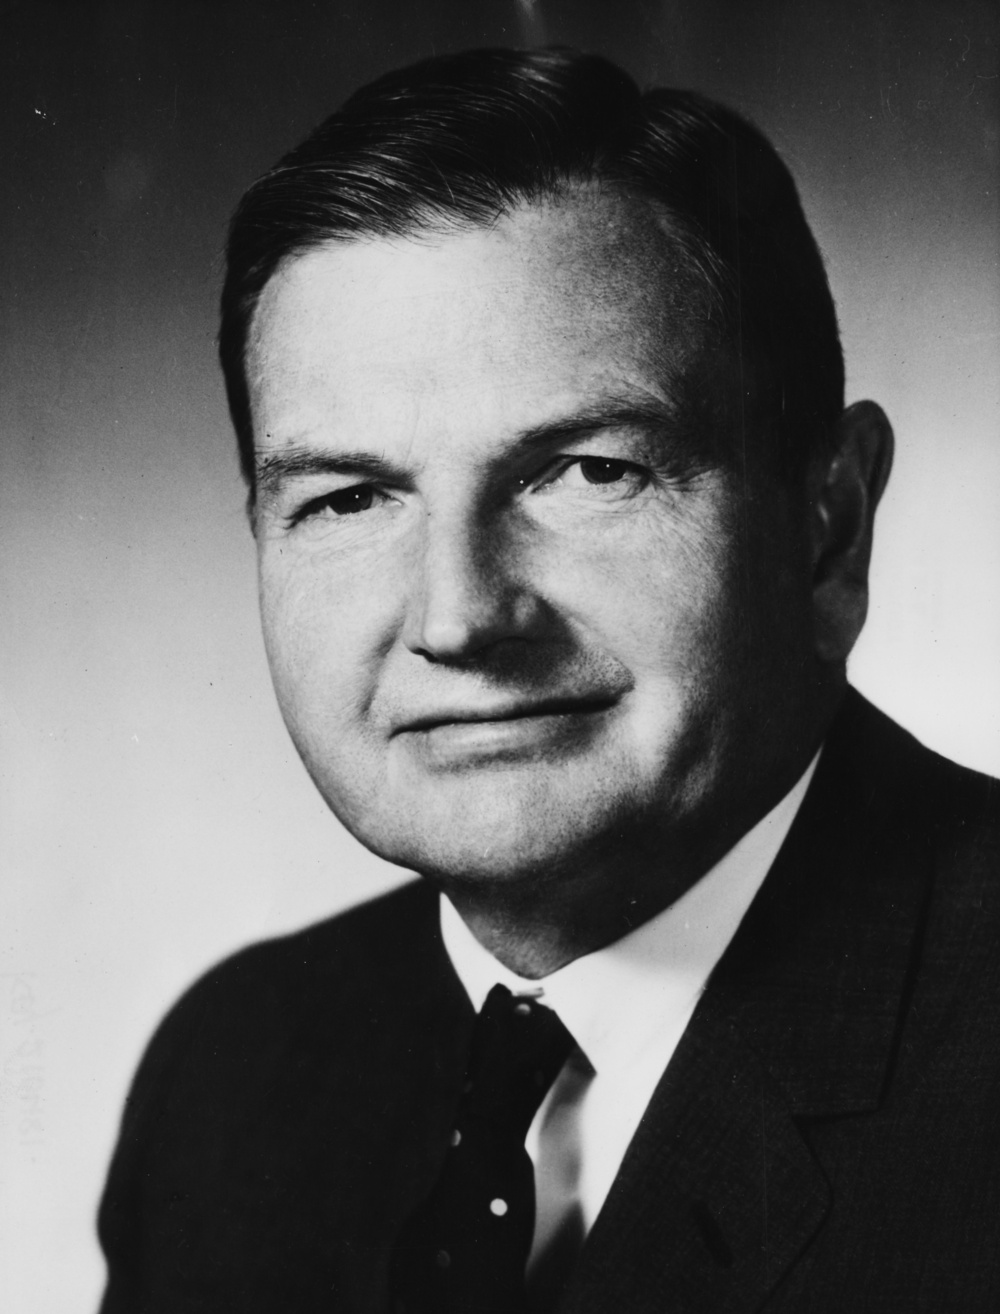 Portrait of banker David Rockefeller, Chairman of the Chase Manhattan Corporation, circa 1965. (Photo by Keystone/Hulton Archive/Getty Images)